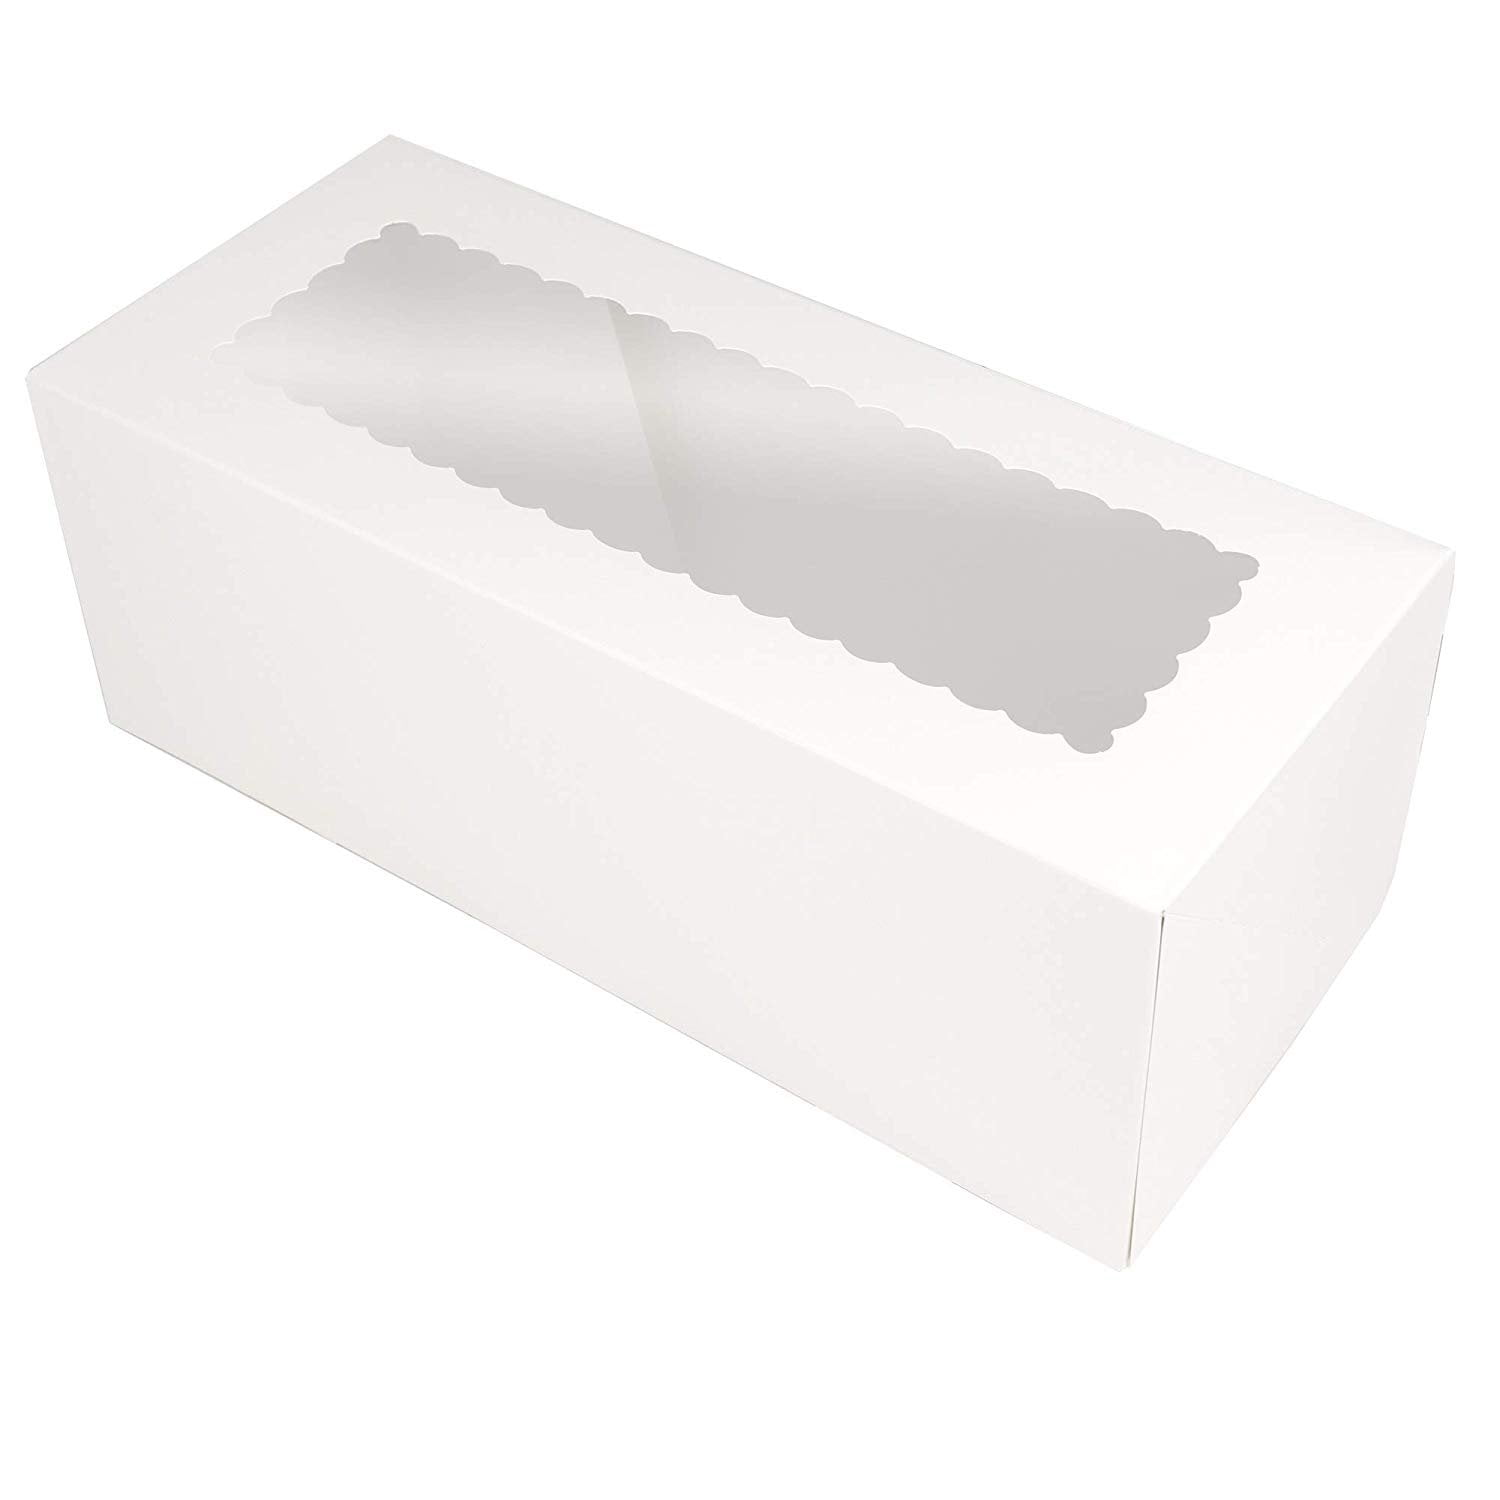 White Large Rectangle 6pk Mini Cakesicle Box With Insert And Clear Lid -  290mm x 125mm x 30mm - Pack of 10